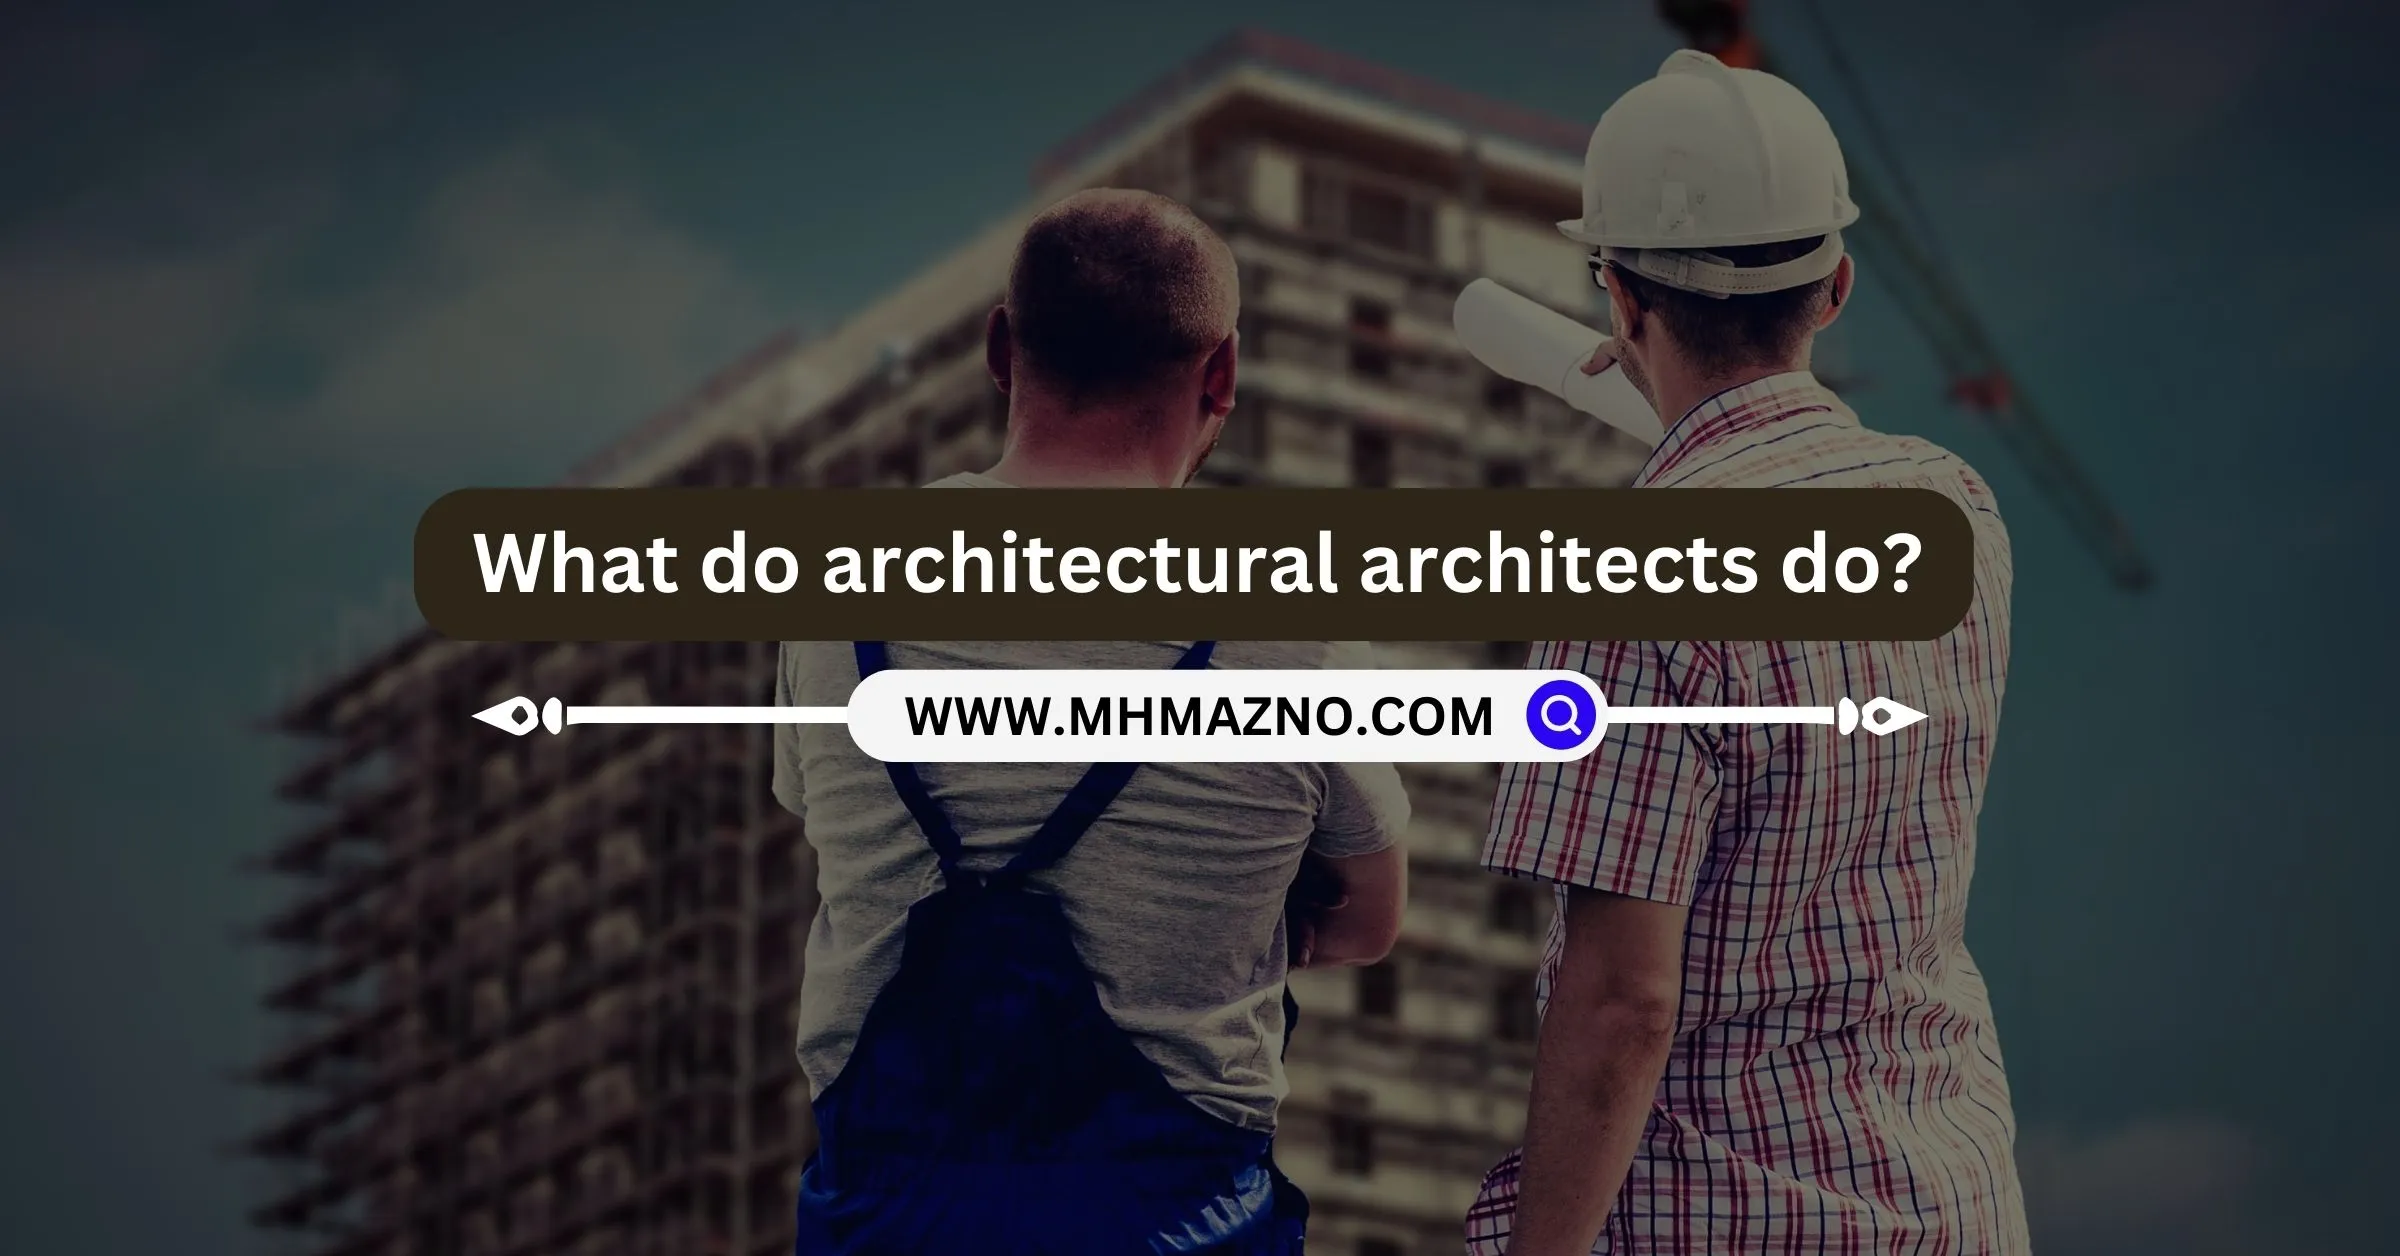 Types of Architecture, and What do architectural architects do